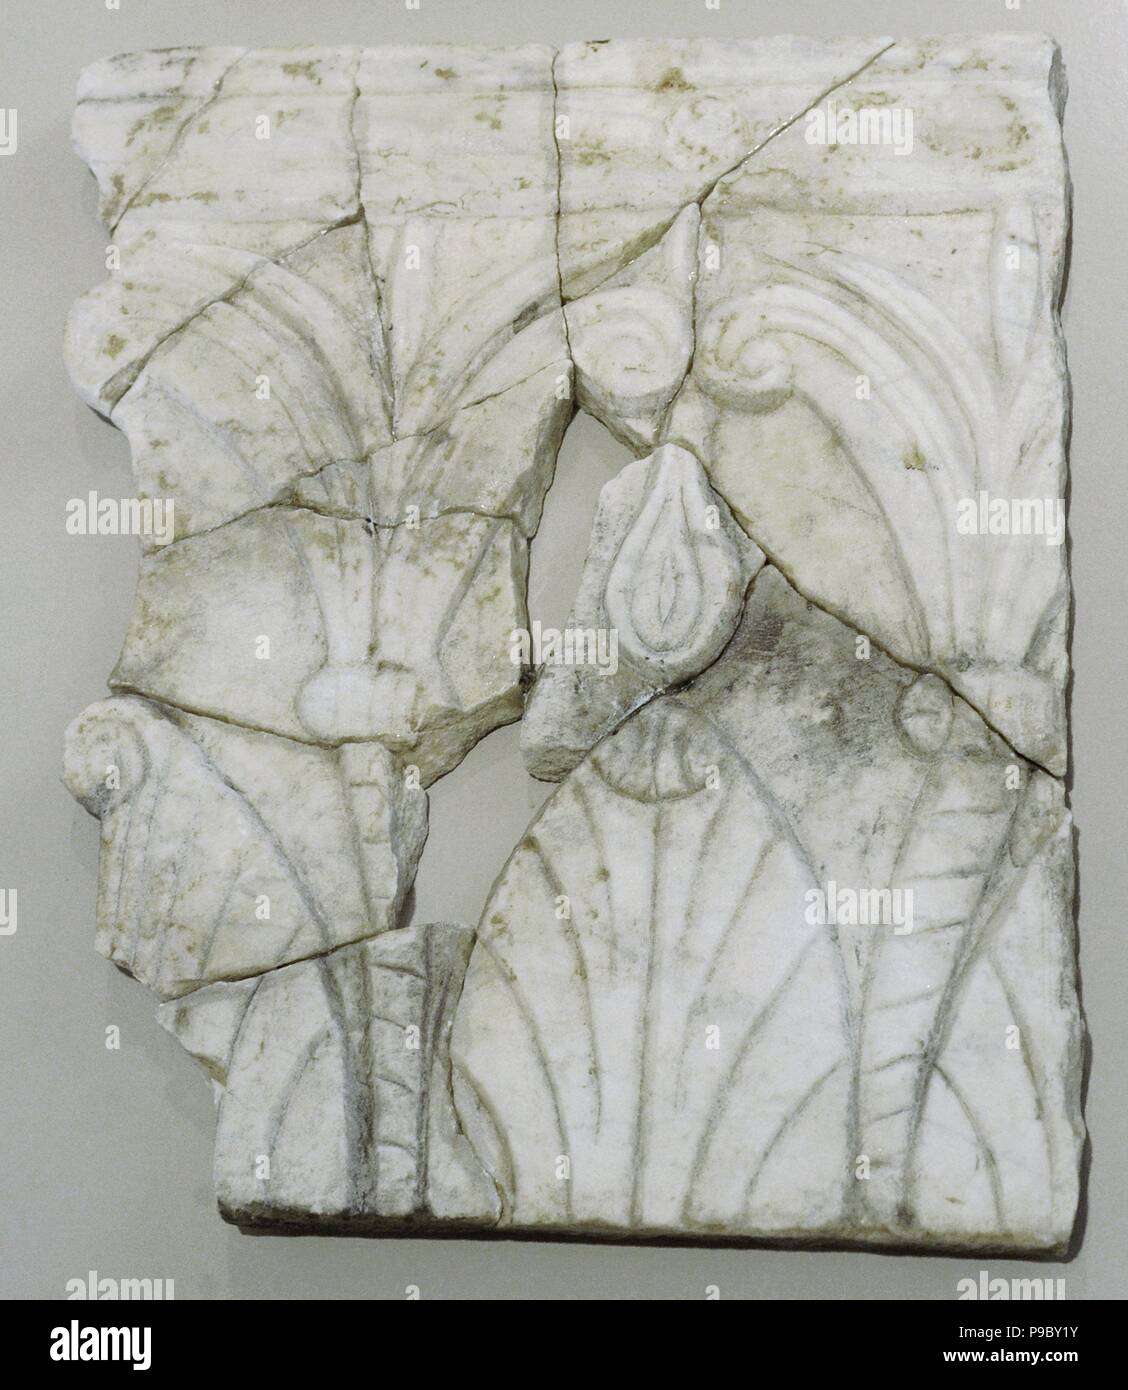 Capital of lesene. 2nd century AD. Capital on marble plaque that was part of the architectural decoration of the residential sector. National Archaeological Museum. Tarragona. Spain. Stock Photo